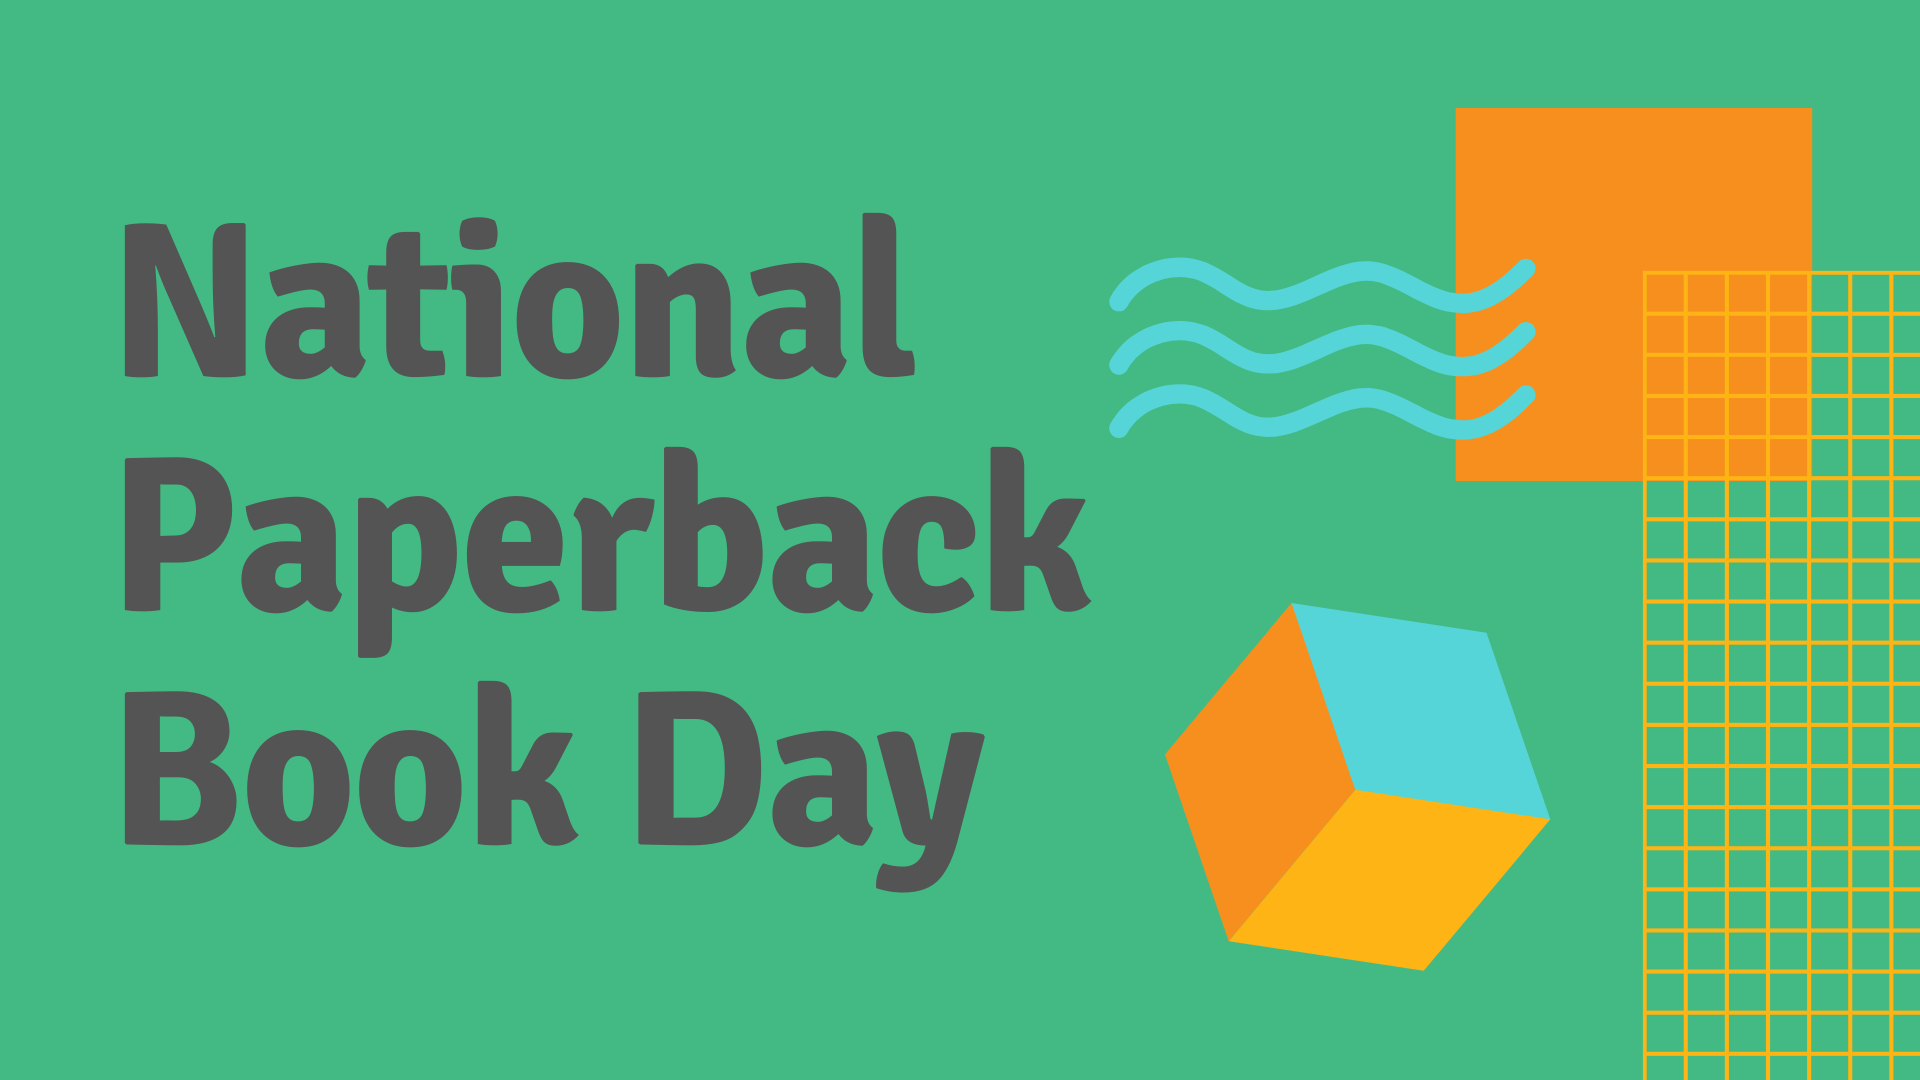 National Paperback Book Day Working In The Schools